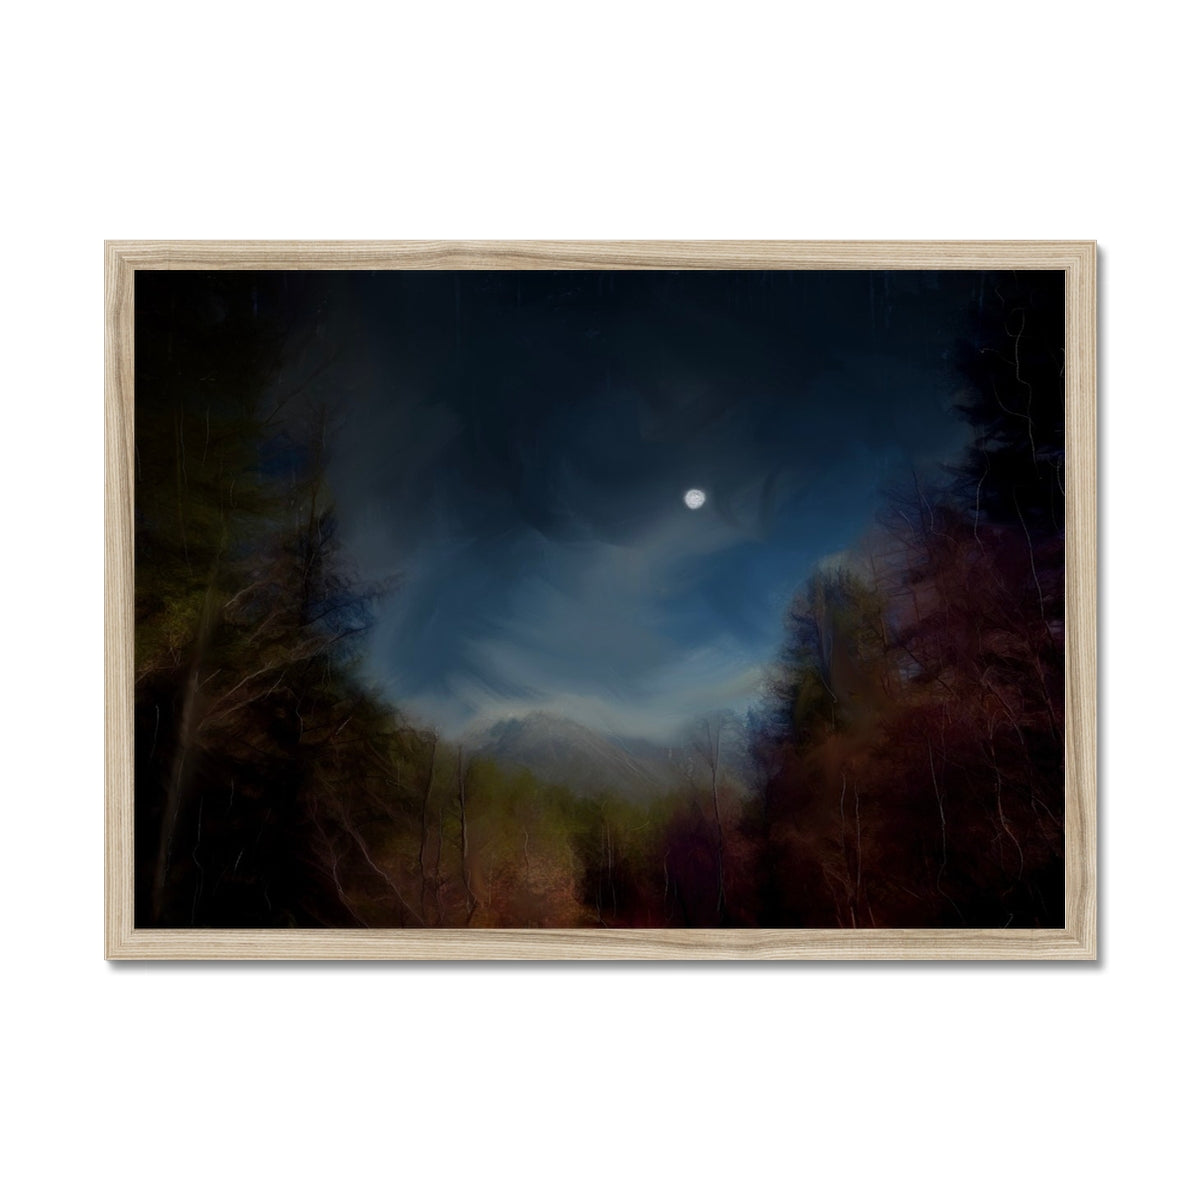 Glencoe Lochan Moonlight Painting | Framed Prints From Scotland-Framed Prints-Scottish Lochs & Mountains Art Gallery-A2 Landscape-Natural Frame-Paintings, Prints, Homeware, Art Gifts From Scotland By Scottish Artist Kevin Hunter